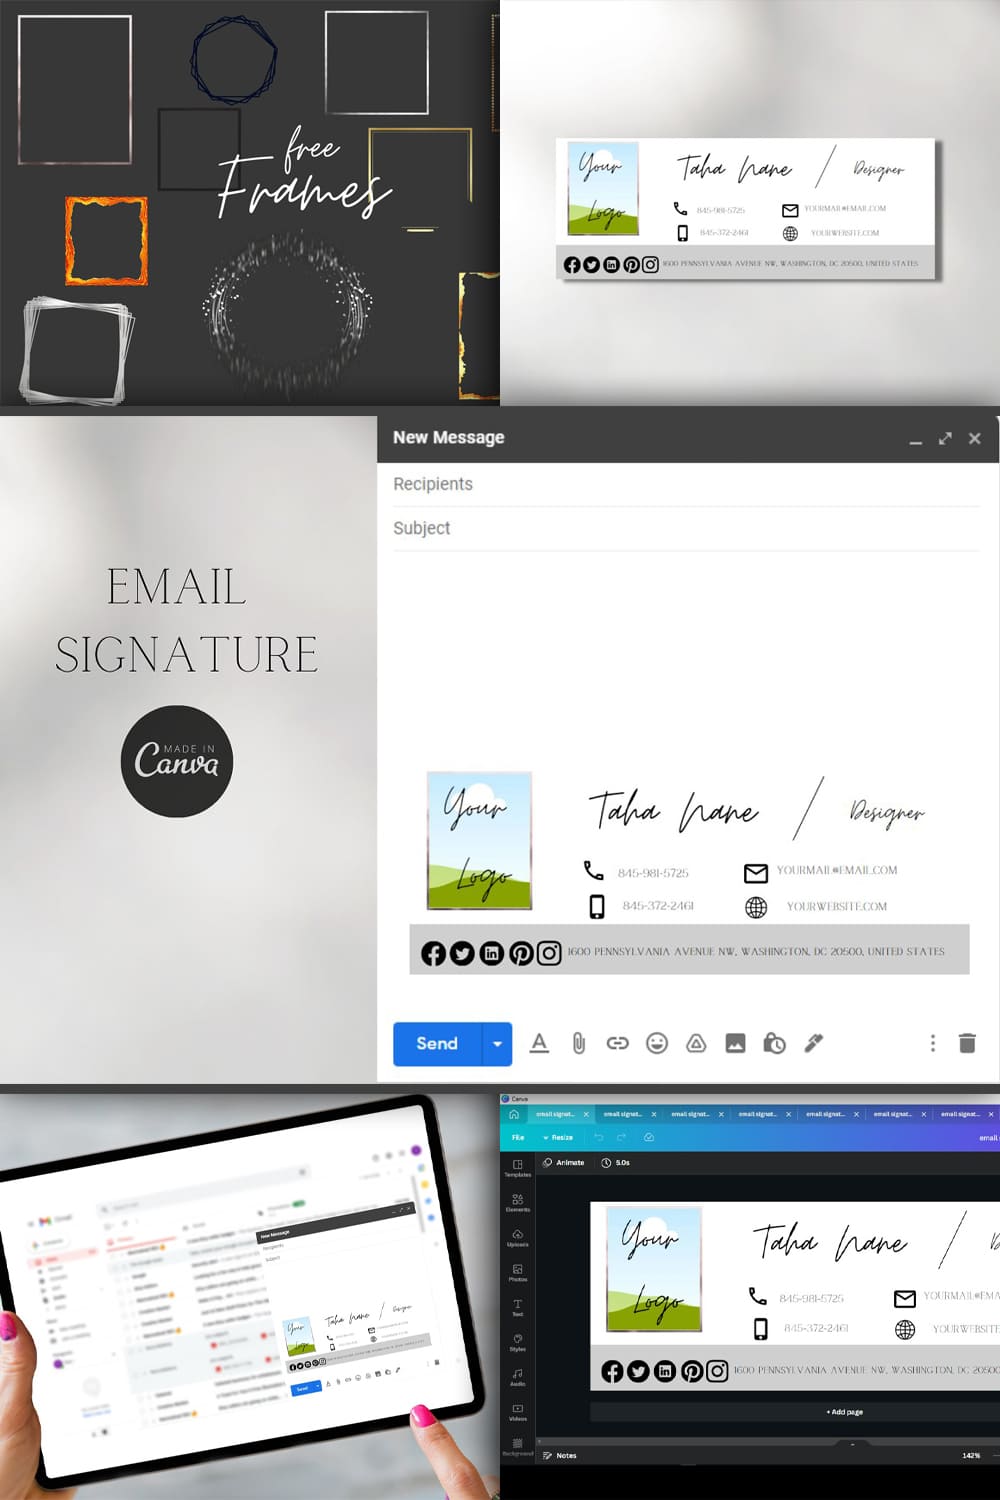 Email Signature Canva Template - Pinterest.